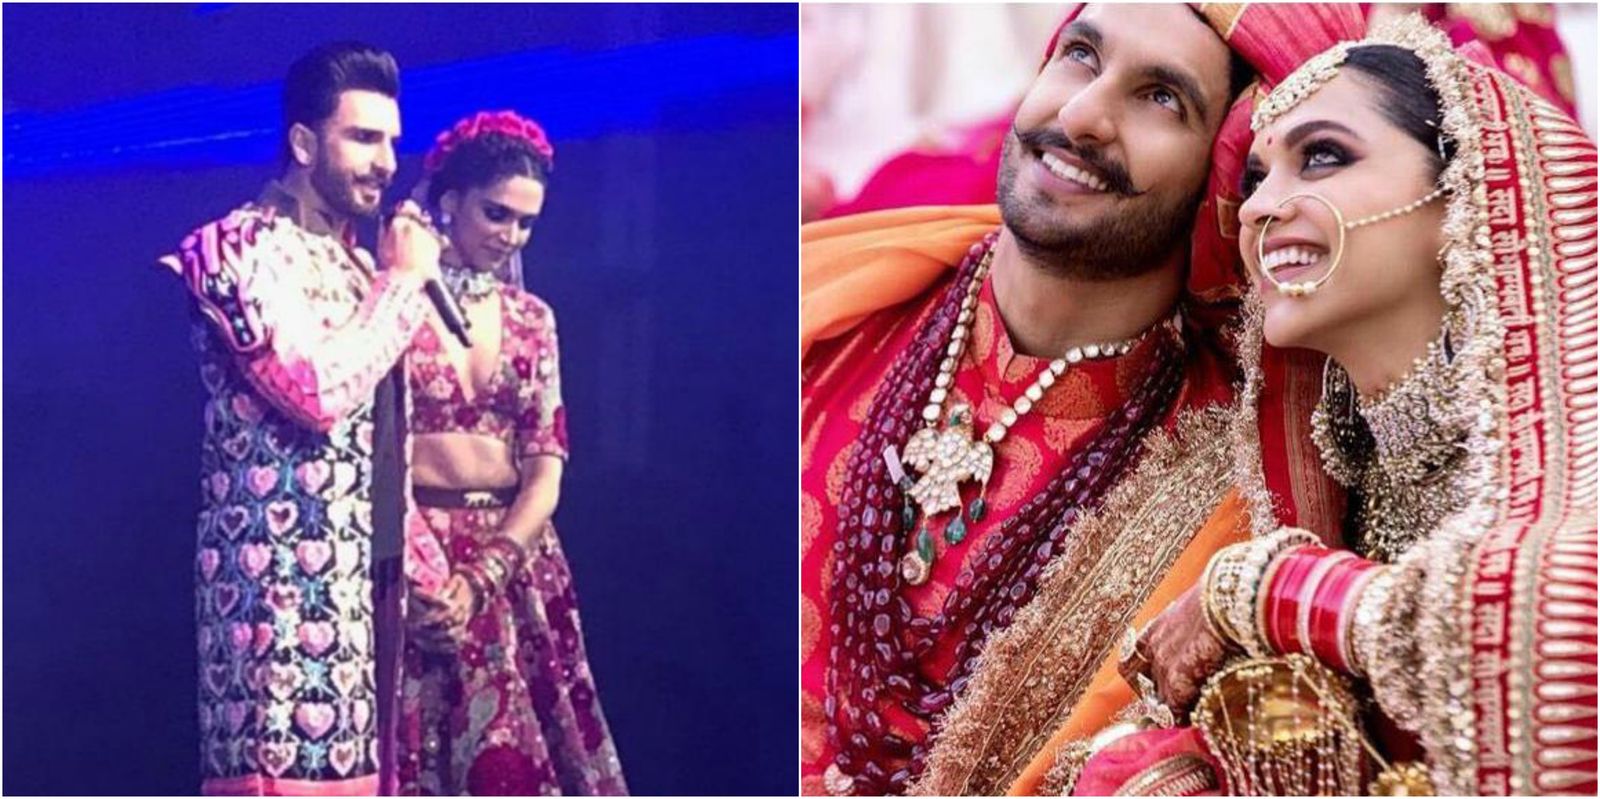 Ranveer Singh Saying He Married The Most Beautiful Girl In The World Has Reduced Us Into a Puddle